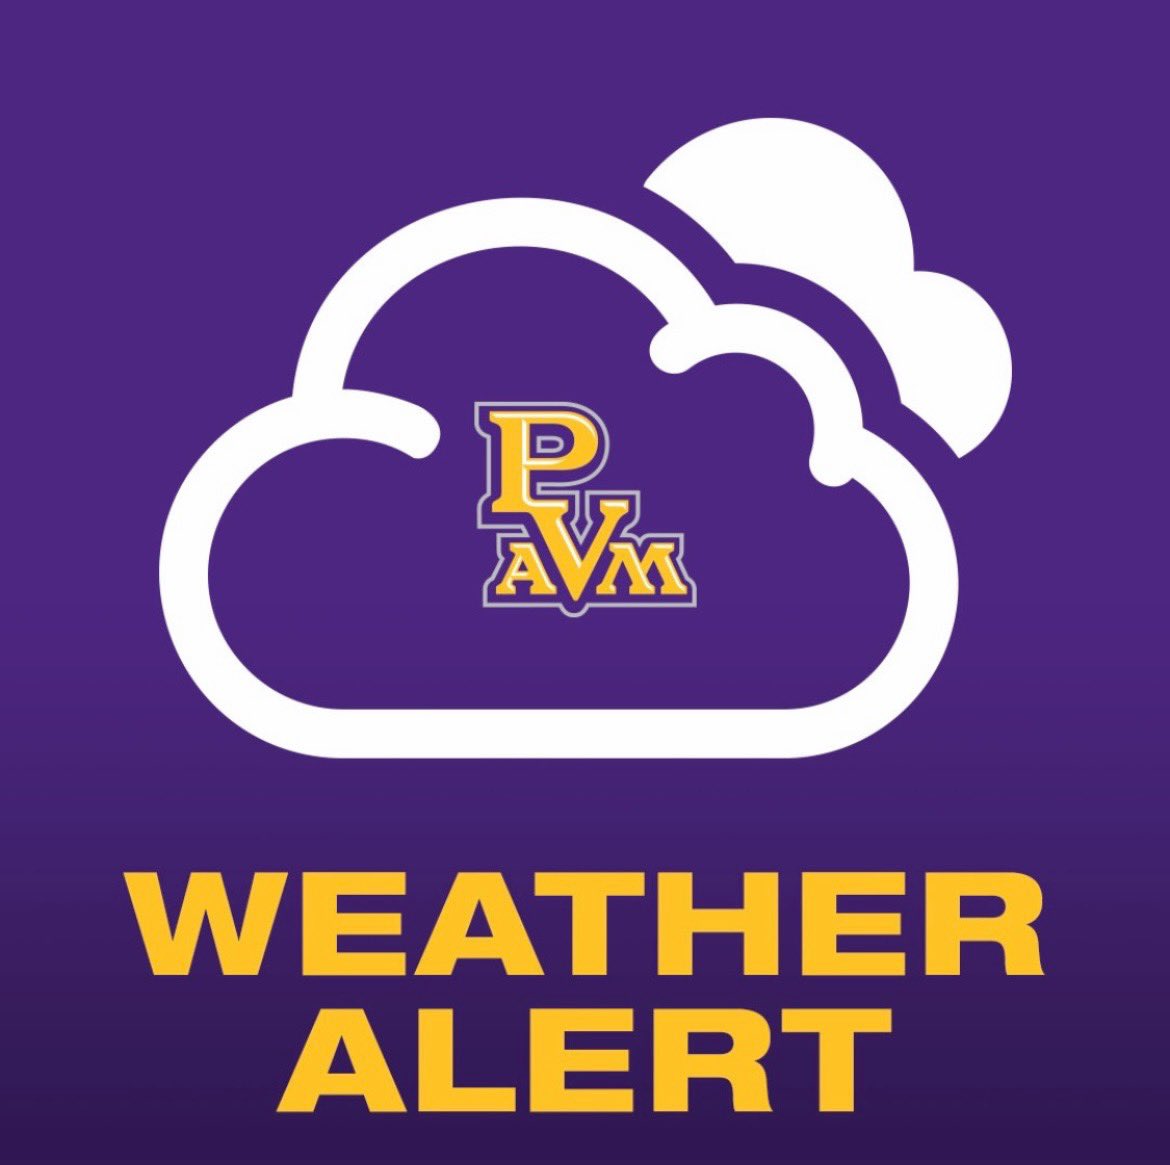 Weather Alert  🌧️🐾 We are monitoring the weather & road conditions & in close contact with area weather experts. Drive cautiously & avoid flood-prone areas. Remember, if you see high water, TURN AROUND. Contact your professor/ supervisor if you have challenges traveling. #PVAMU